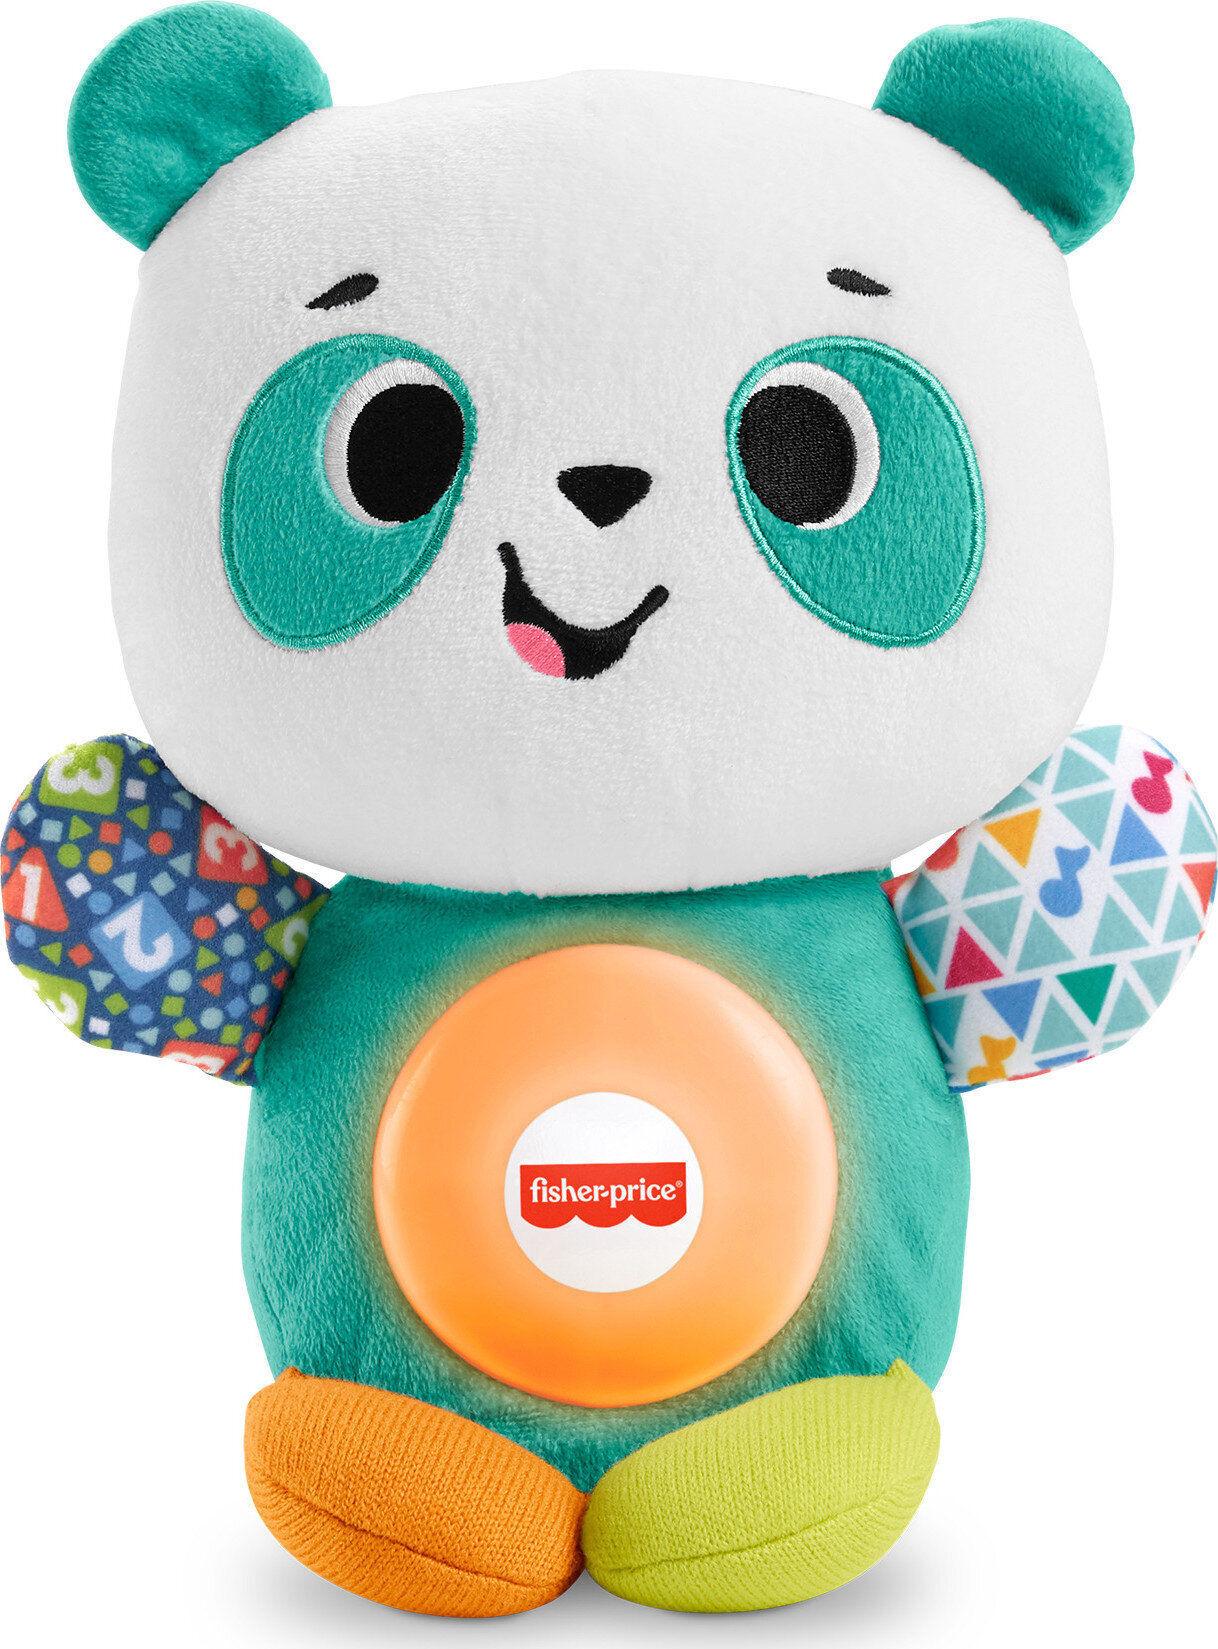 Fisher-Price Linkimals Play Together Panda Interactive Musical Plush Toy for Infant & Toddler - image 1 of 8